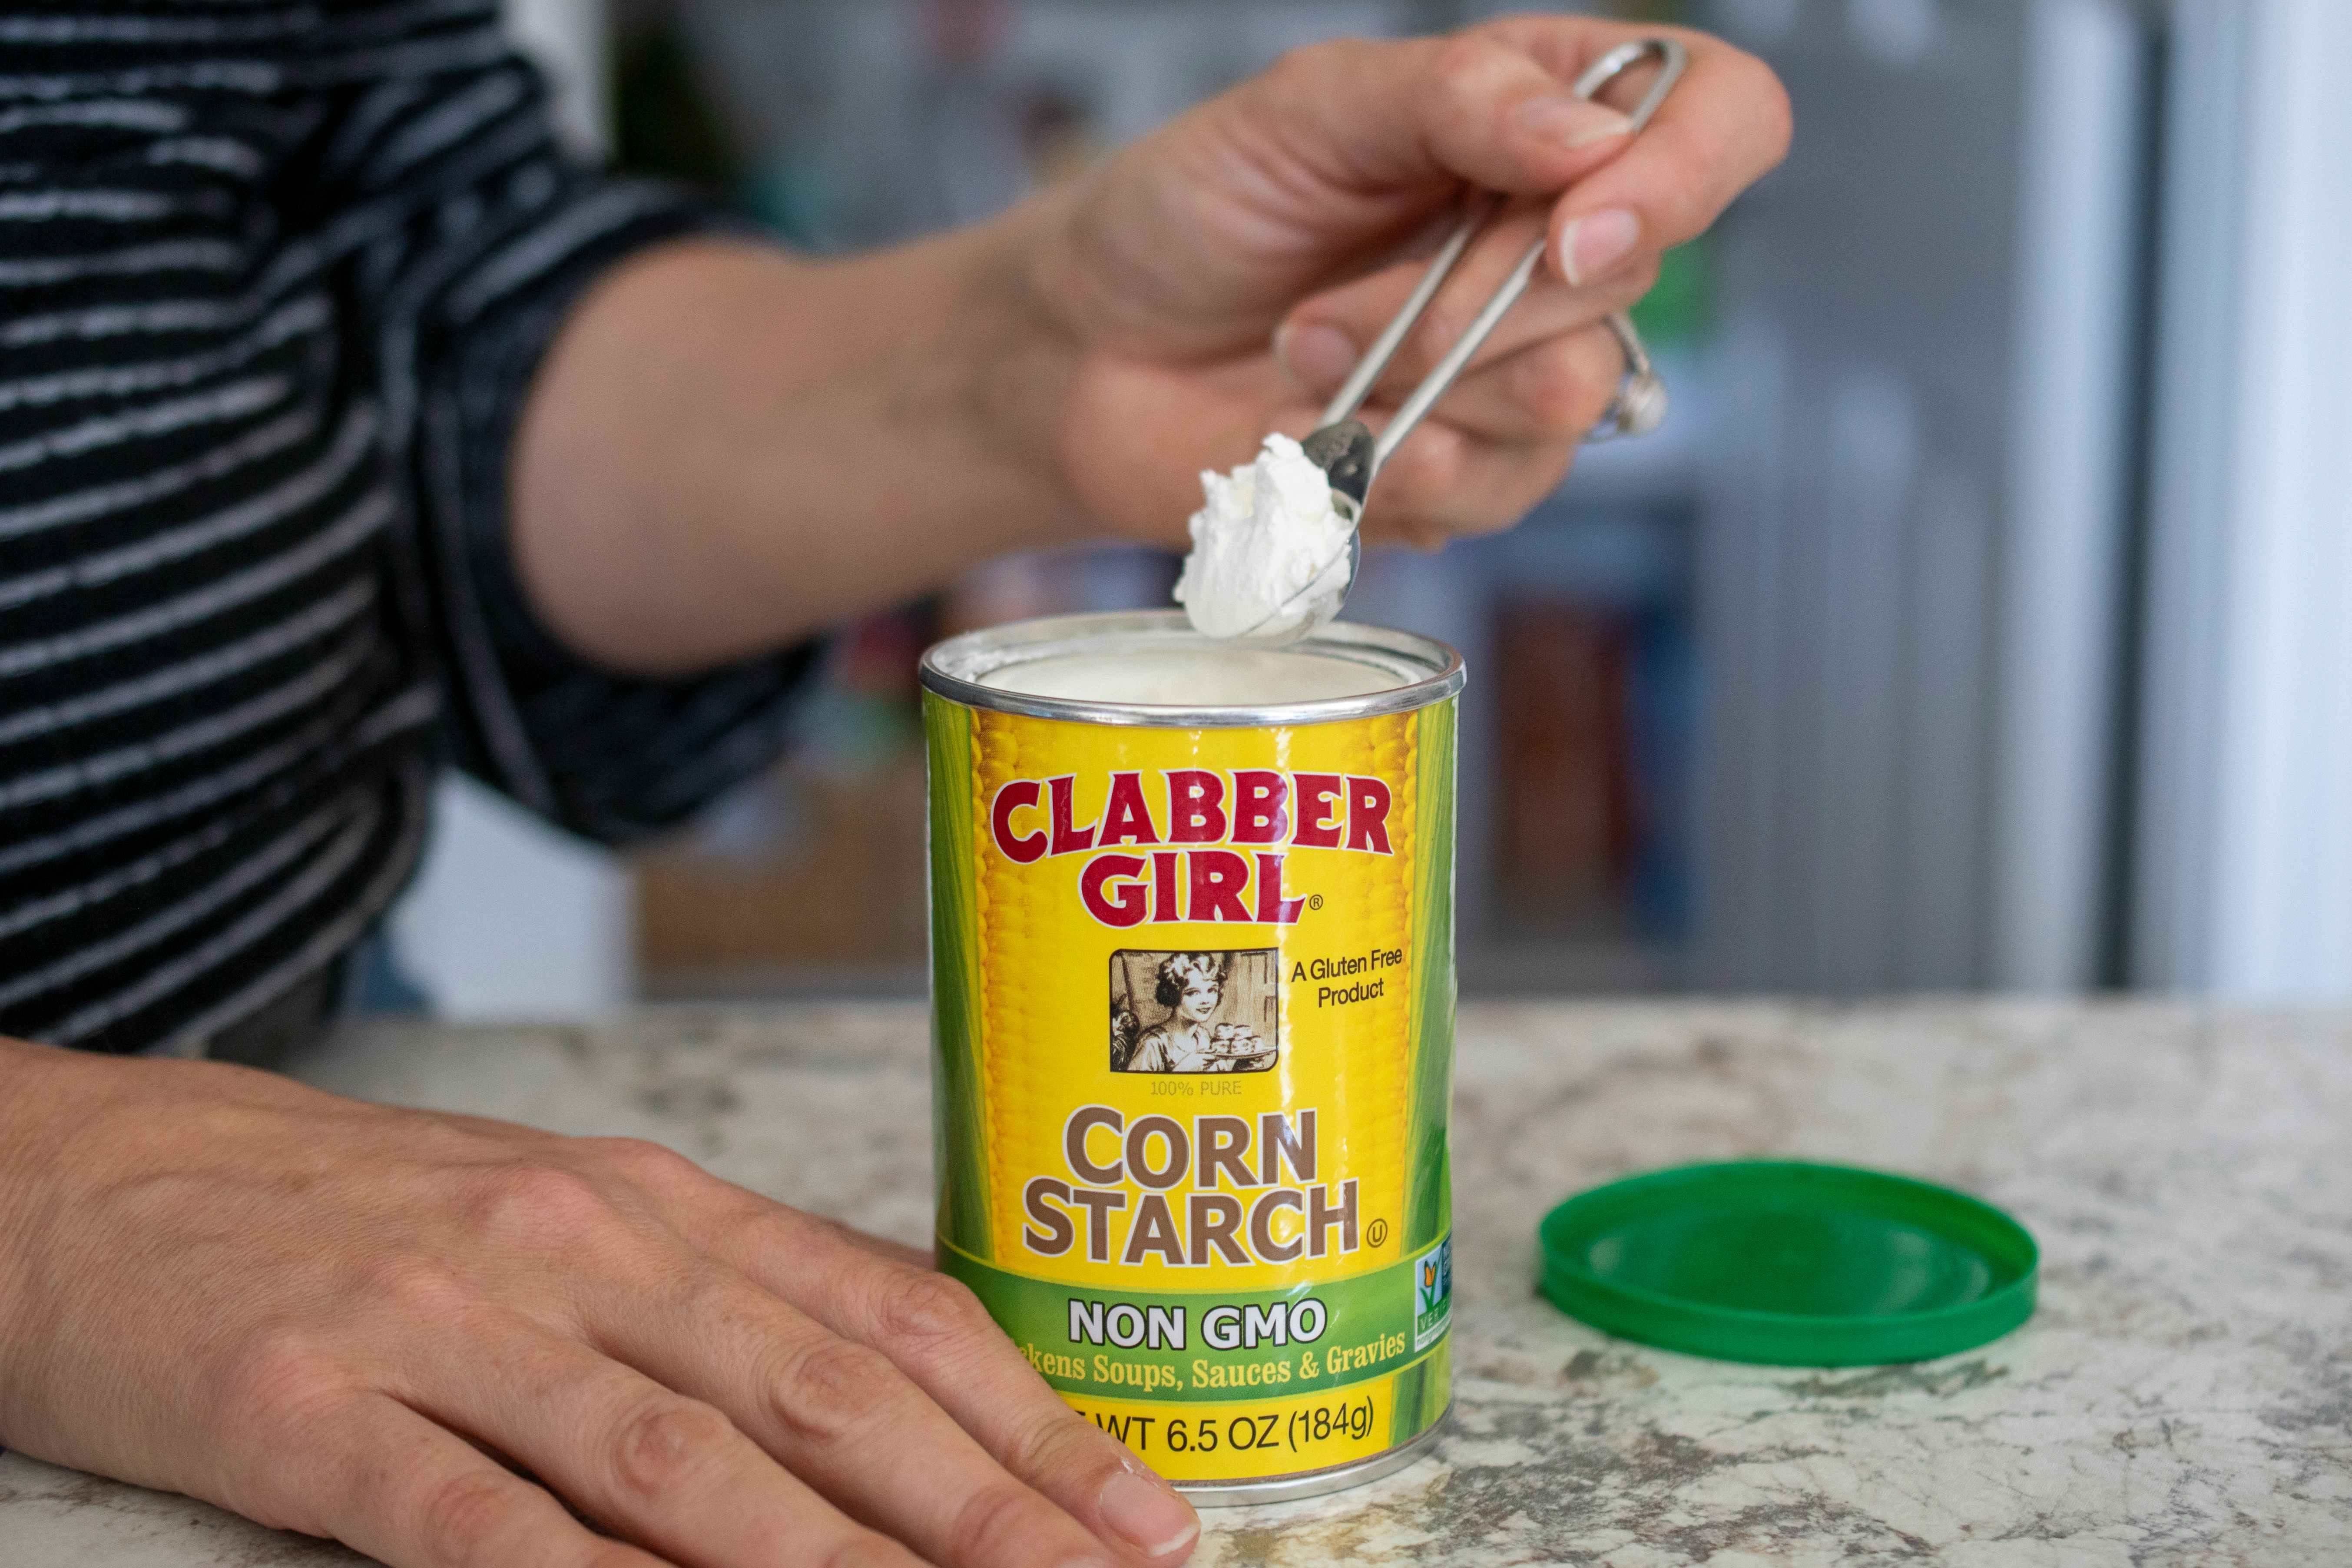 A person using a measuring spoon to scoop out corn starch from a canister